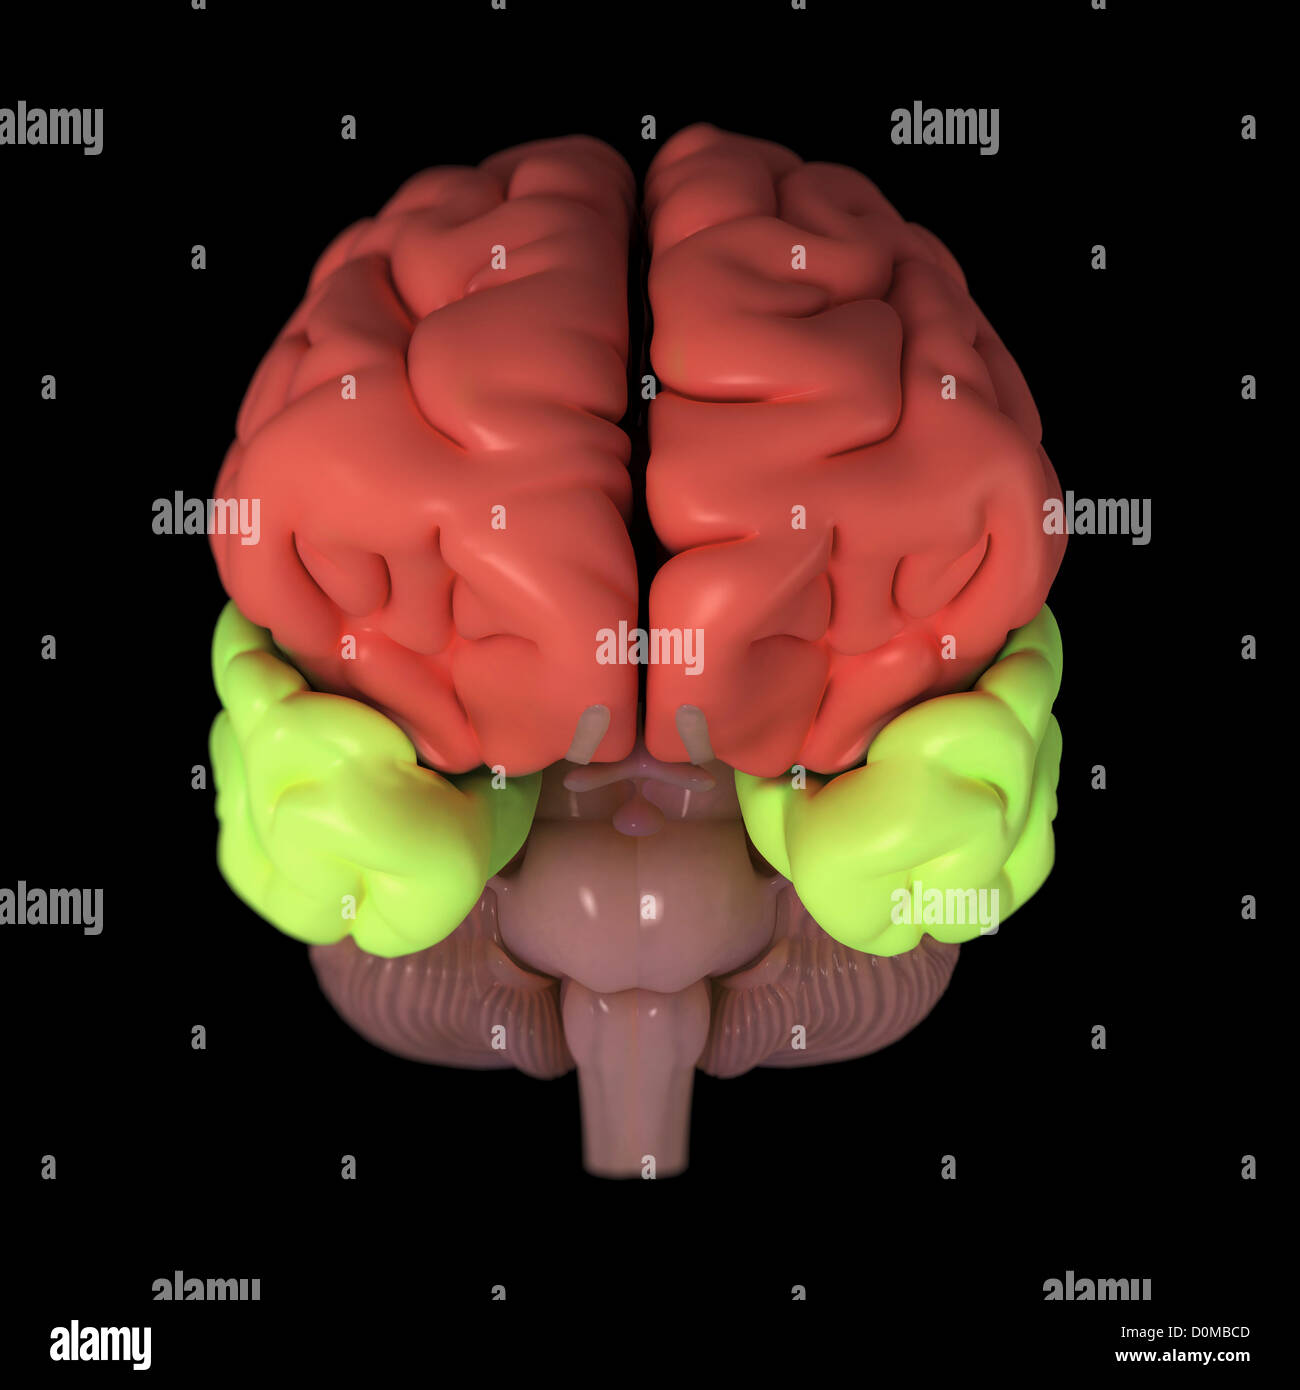 A model of the human brain, isolating different lobes with color. Stock Photo